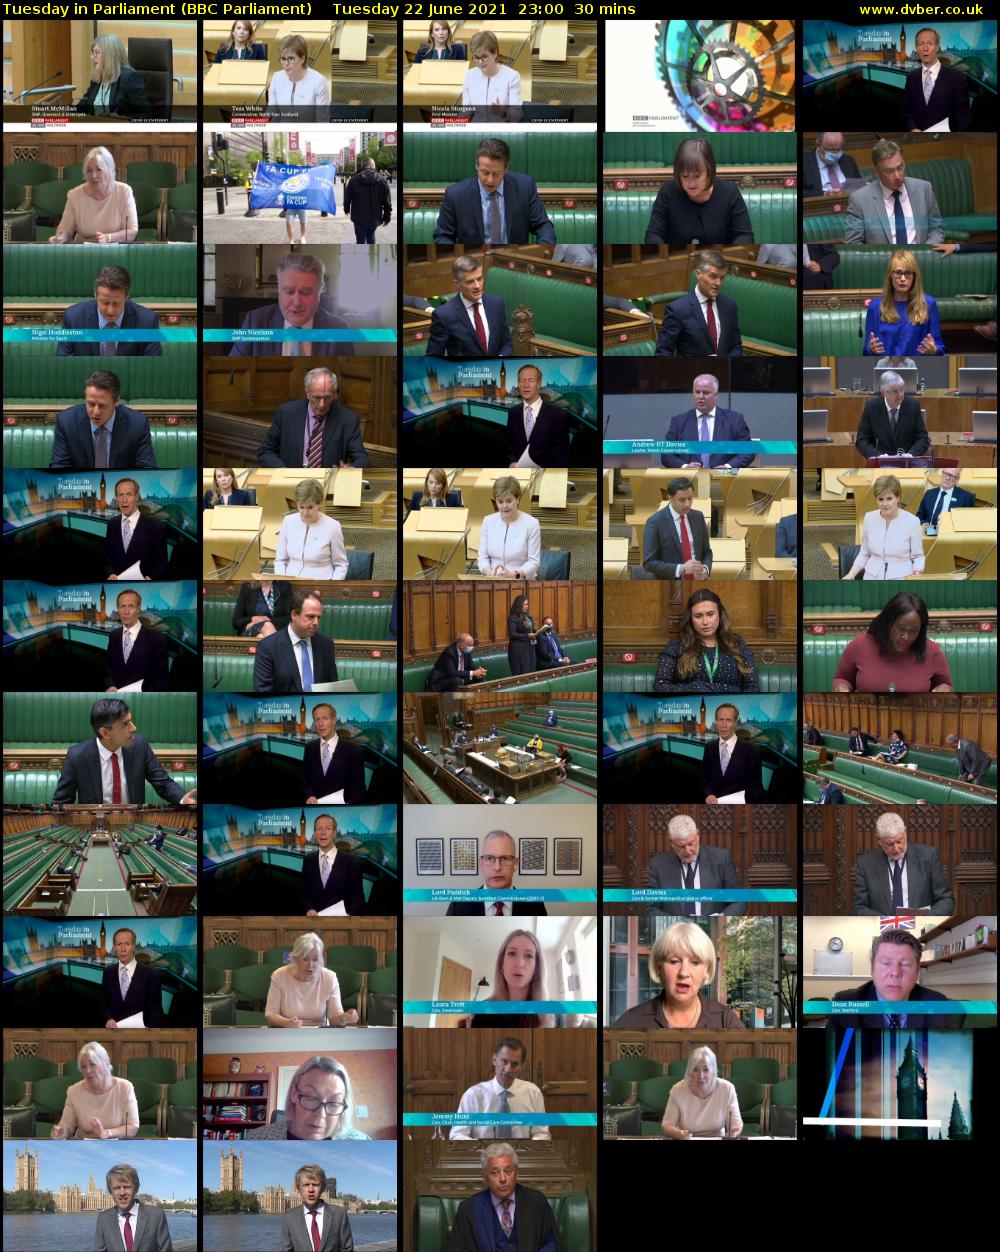 Tuesday in Parliament (BBC Parliament) Tuesday 22 June 2021 23:00 - 23:30